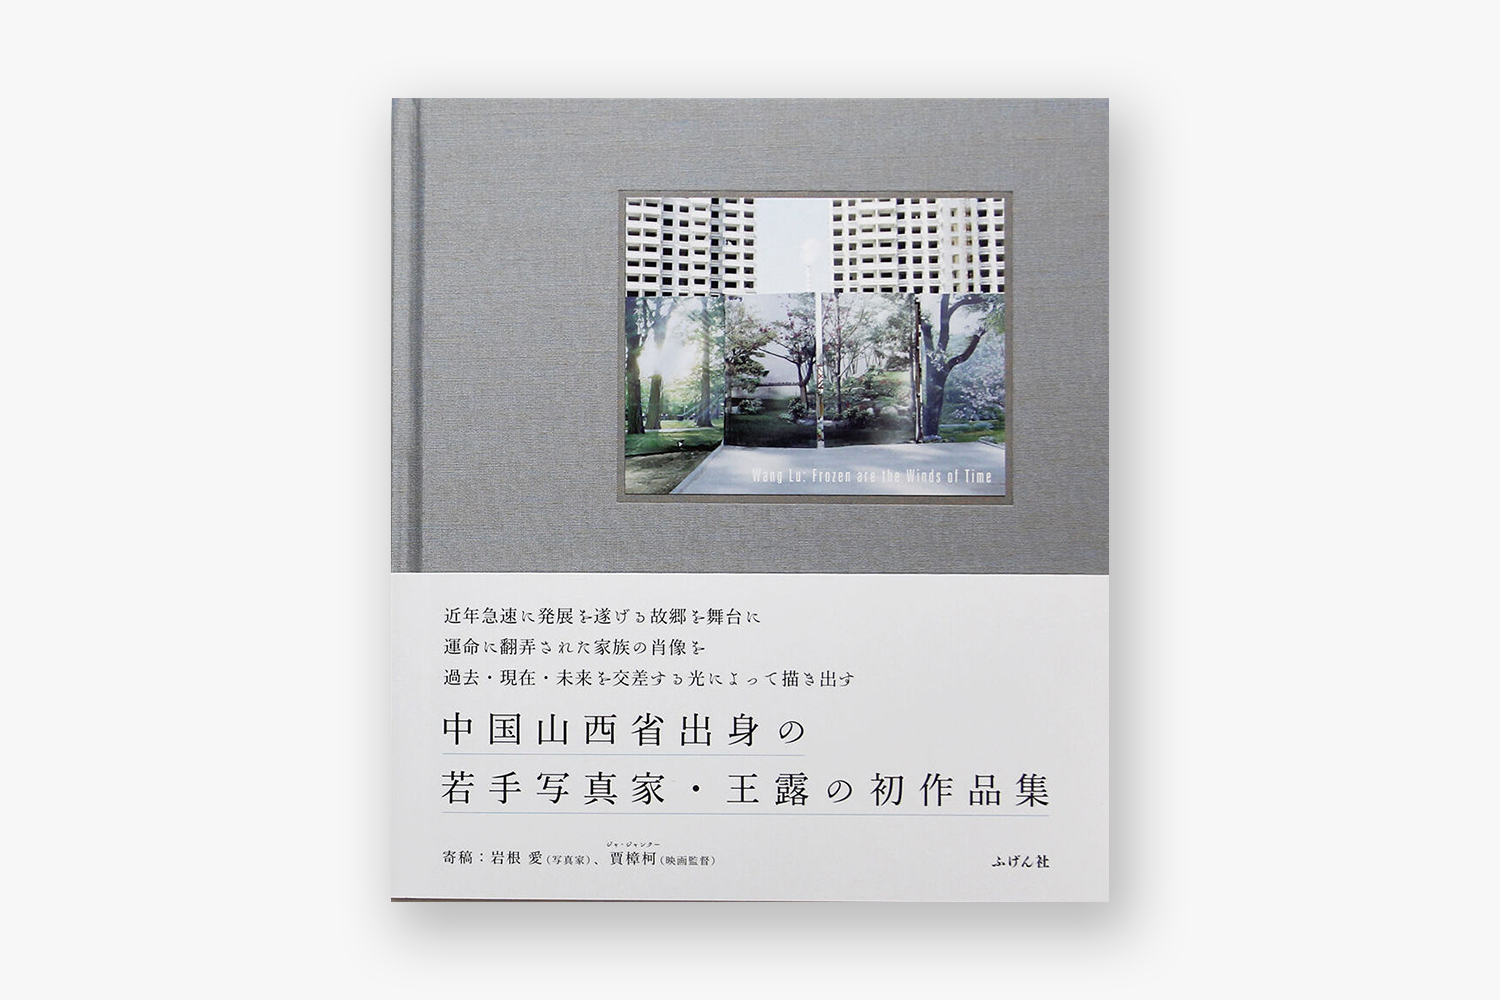 wang lu frozen are the winds of time book photography of china 2 cover - Frozen are the Winds of Time (A) |  - Frozen are the Winds of Time (A)